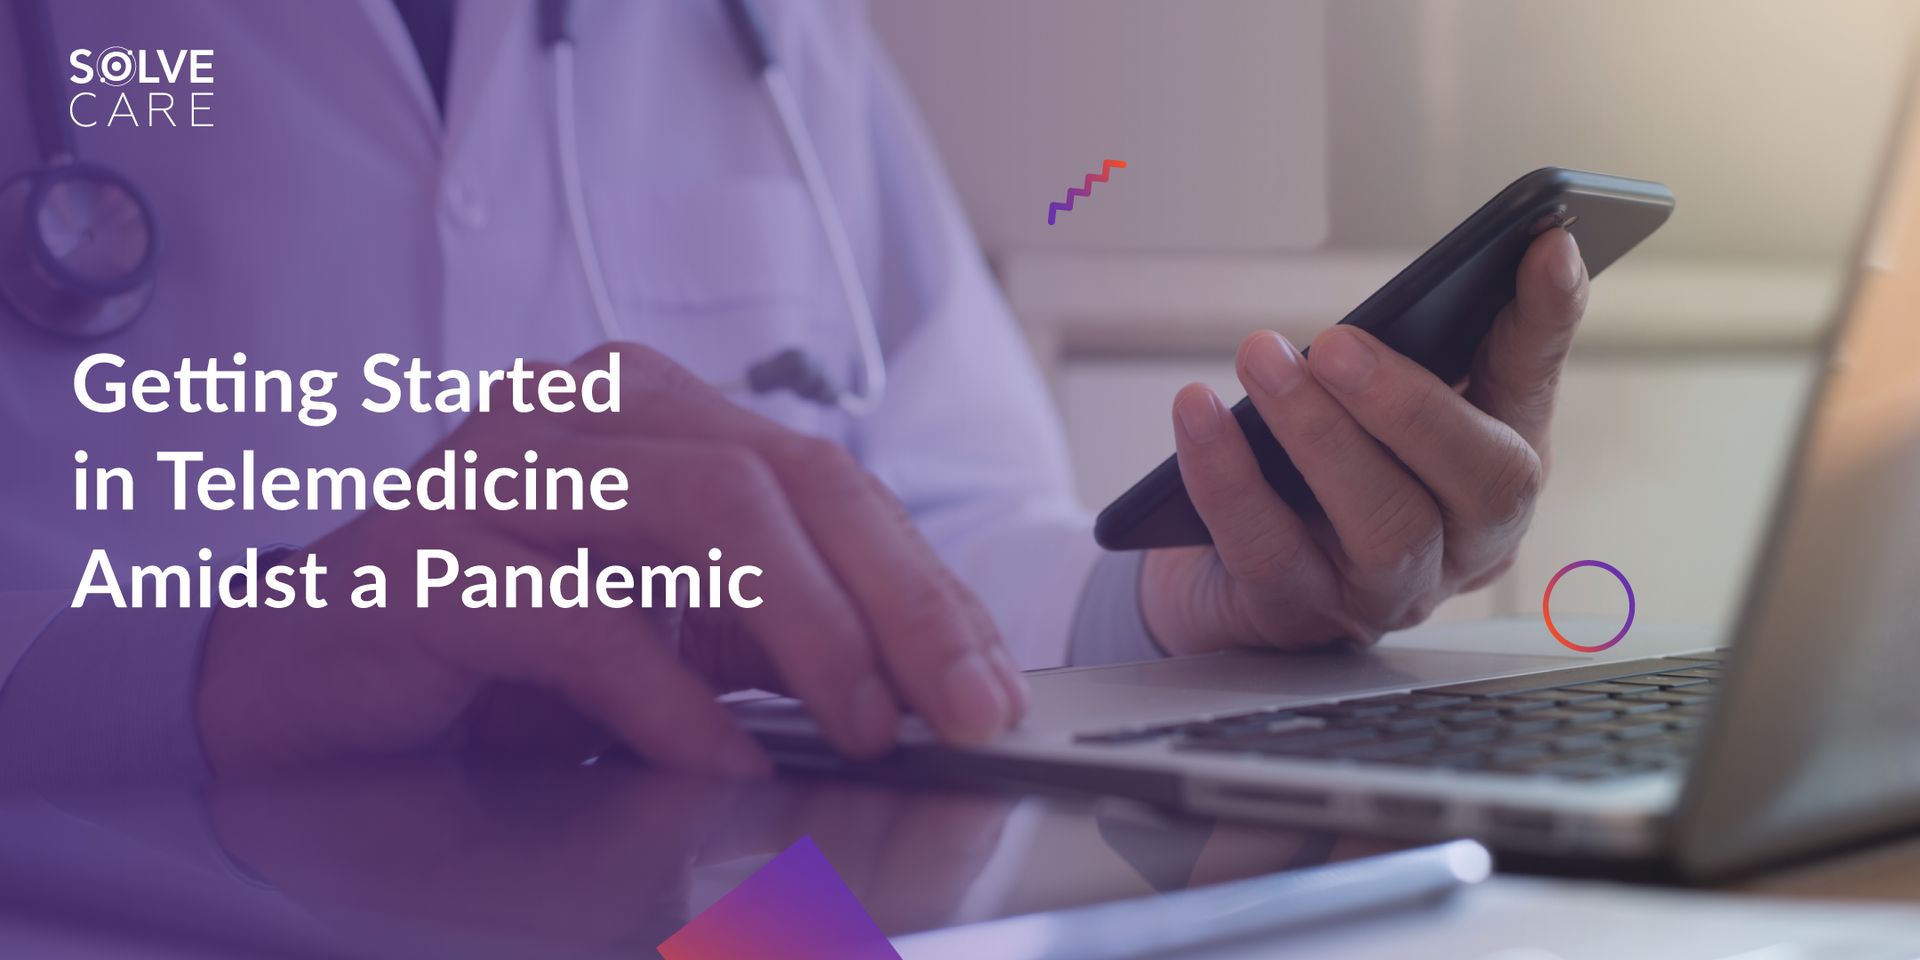 "Getting Started in Telemedicine Amidst a Pandemic" Roundtable Discussion